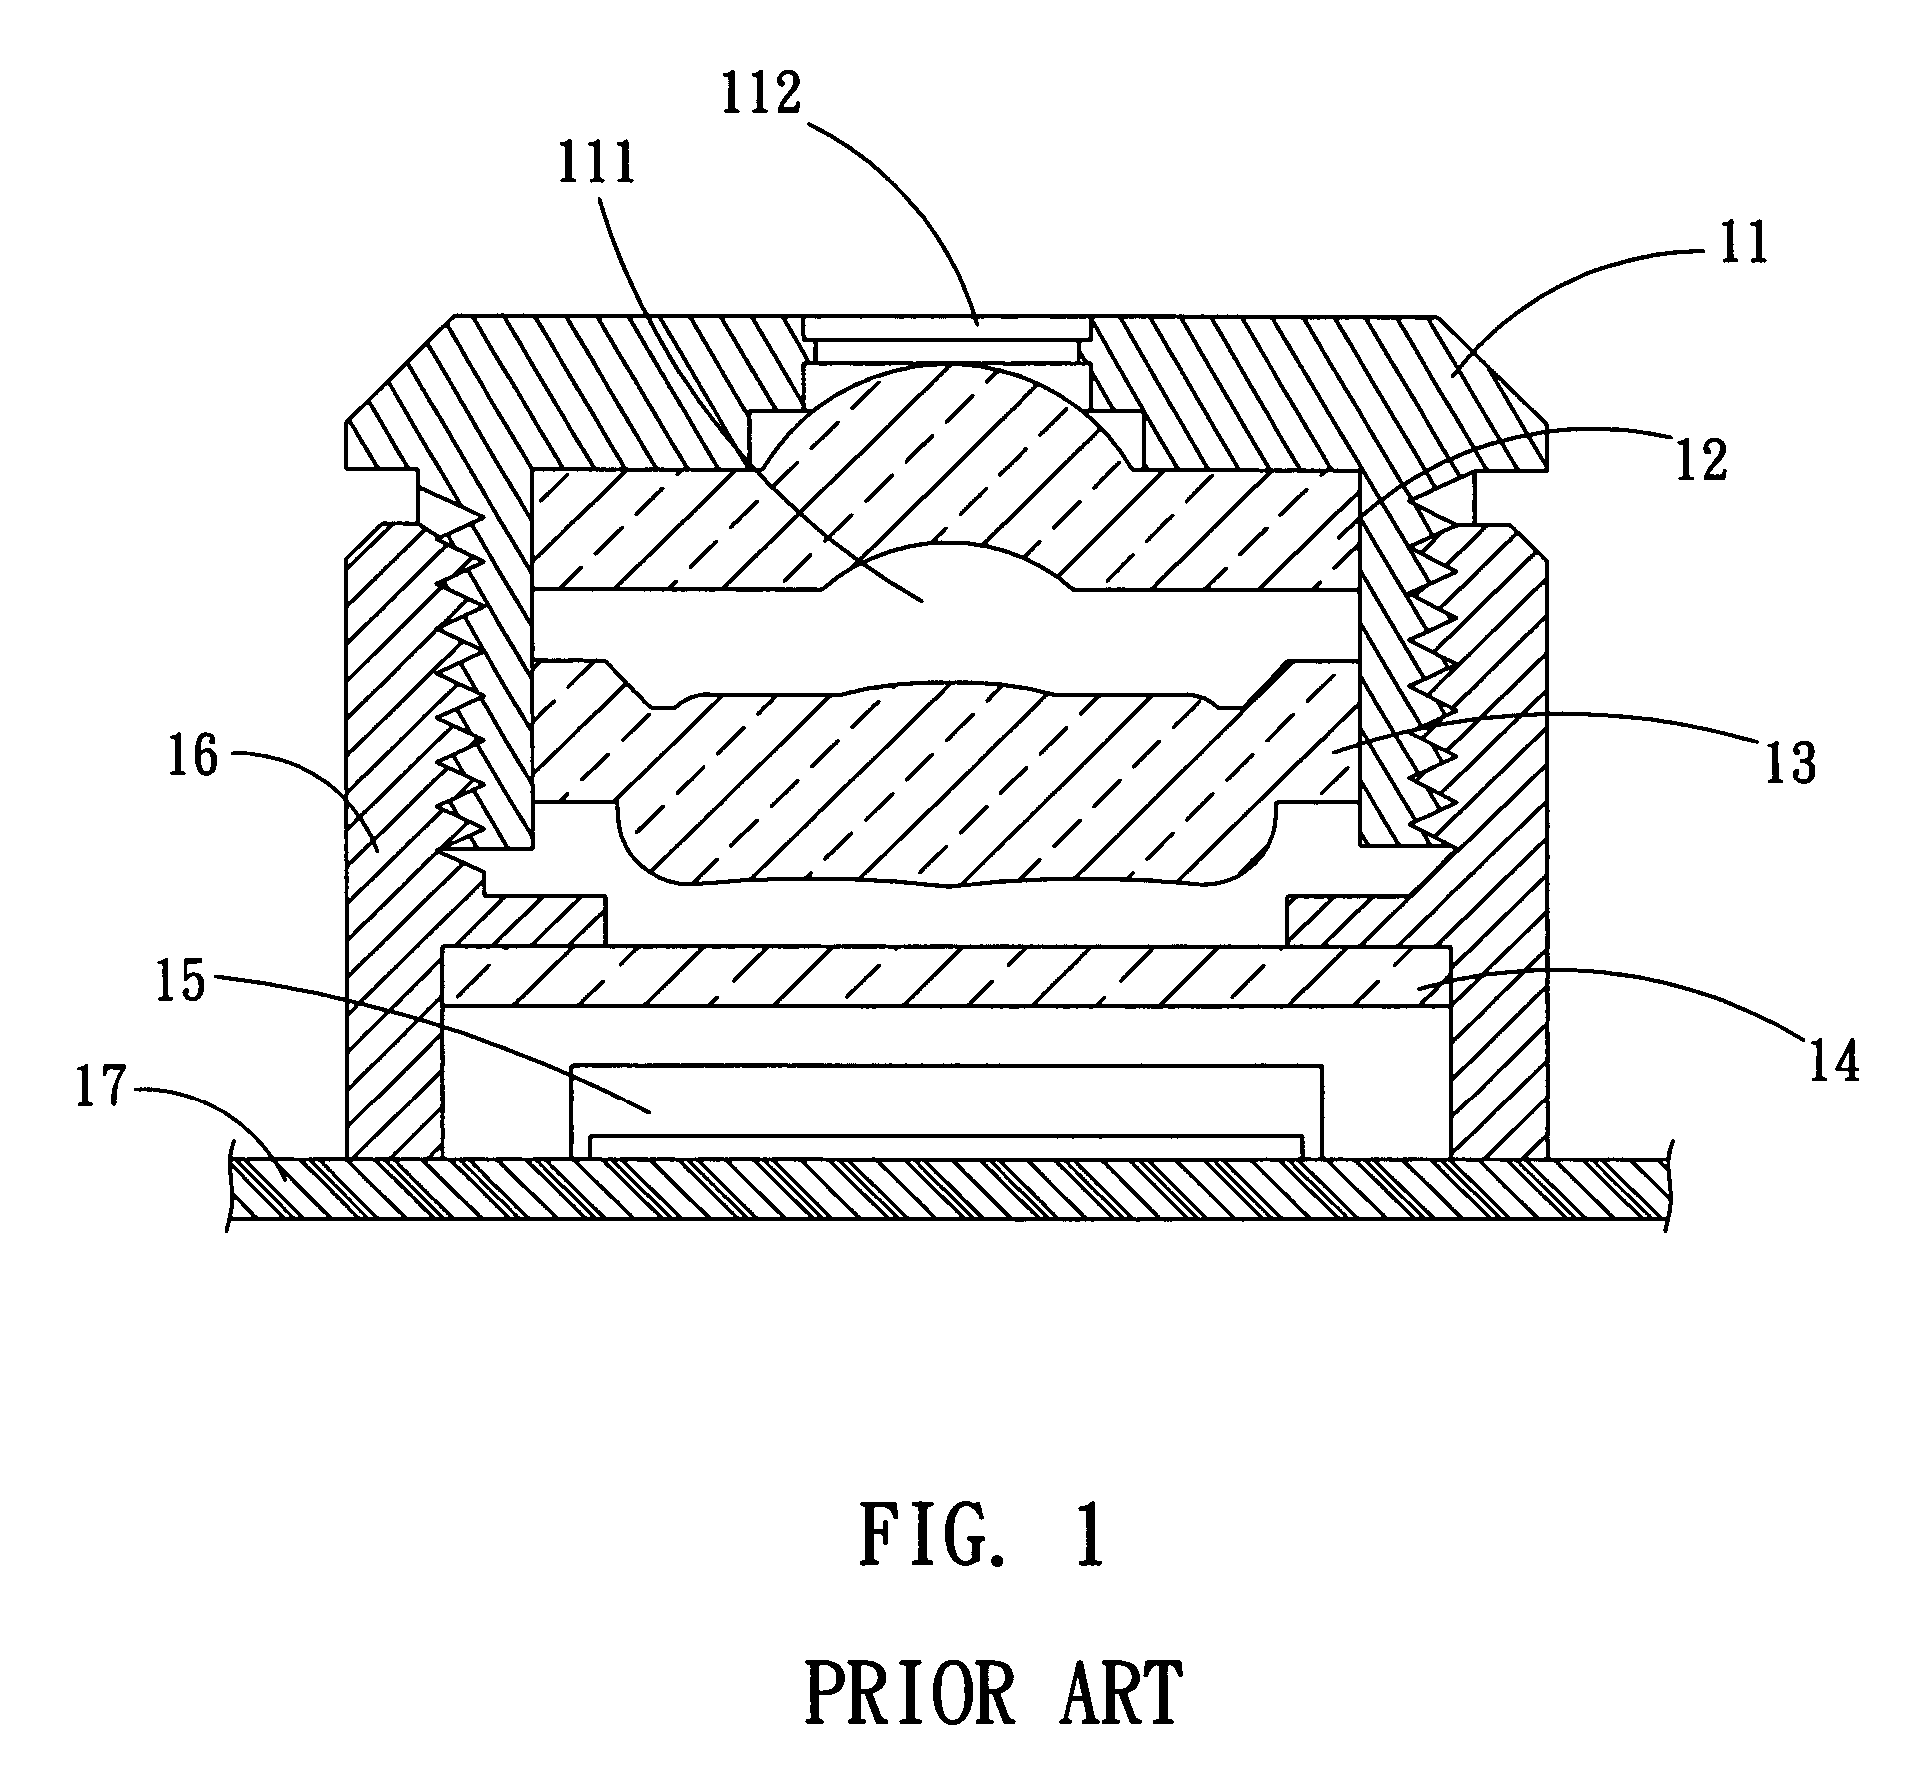 Image pickup lens assembly with a filter lens